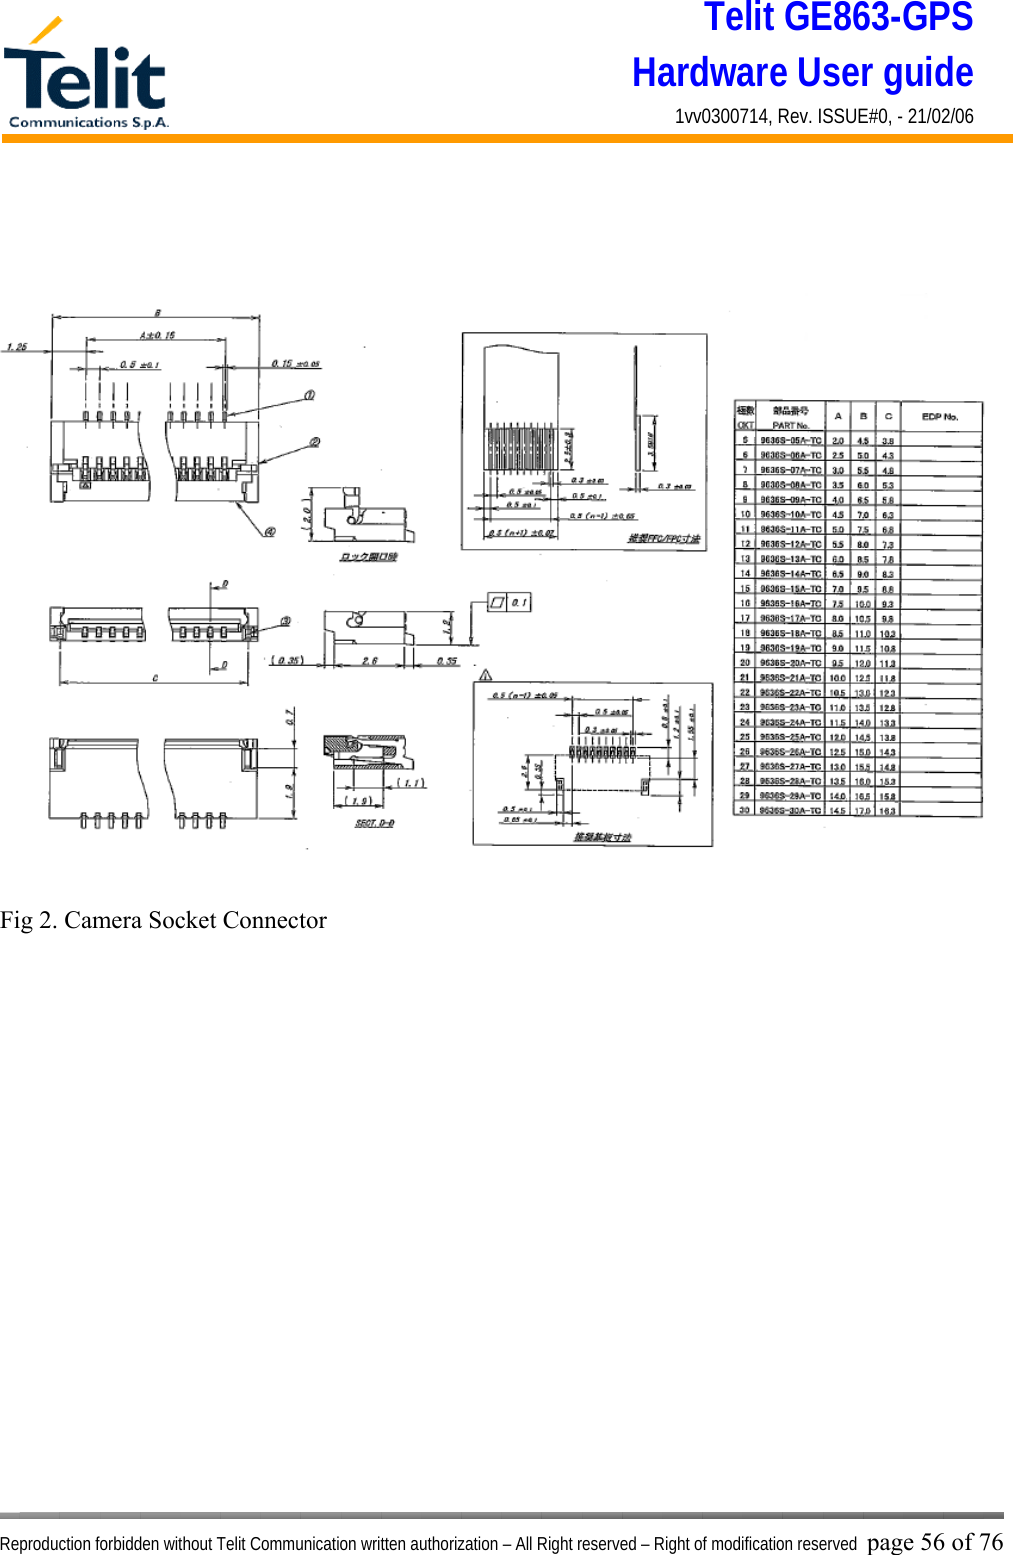 Telit GE863-GPS Hardware User guide 1vv0300714, Rev. ISSUE#0, - 21/02/06    Reproduction forbidden without Telit Communication written authorization – All Right reserved – Right of modification reserved page 56 of 76                    Fig 2. Camera Socket Connector 